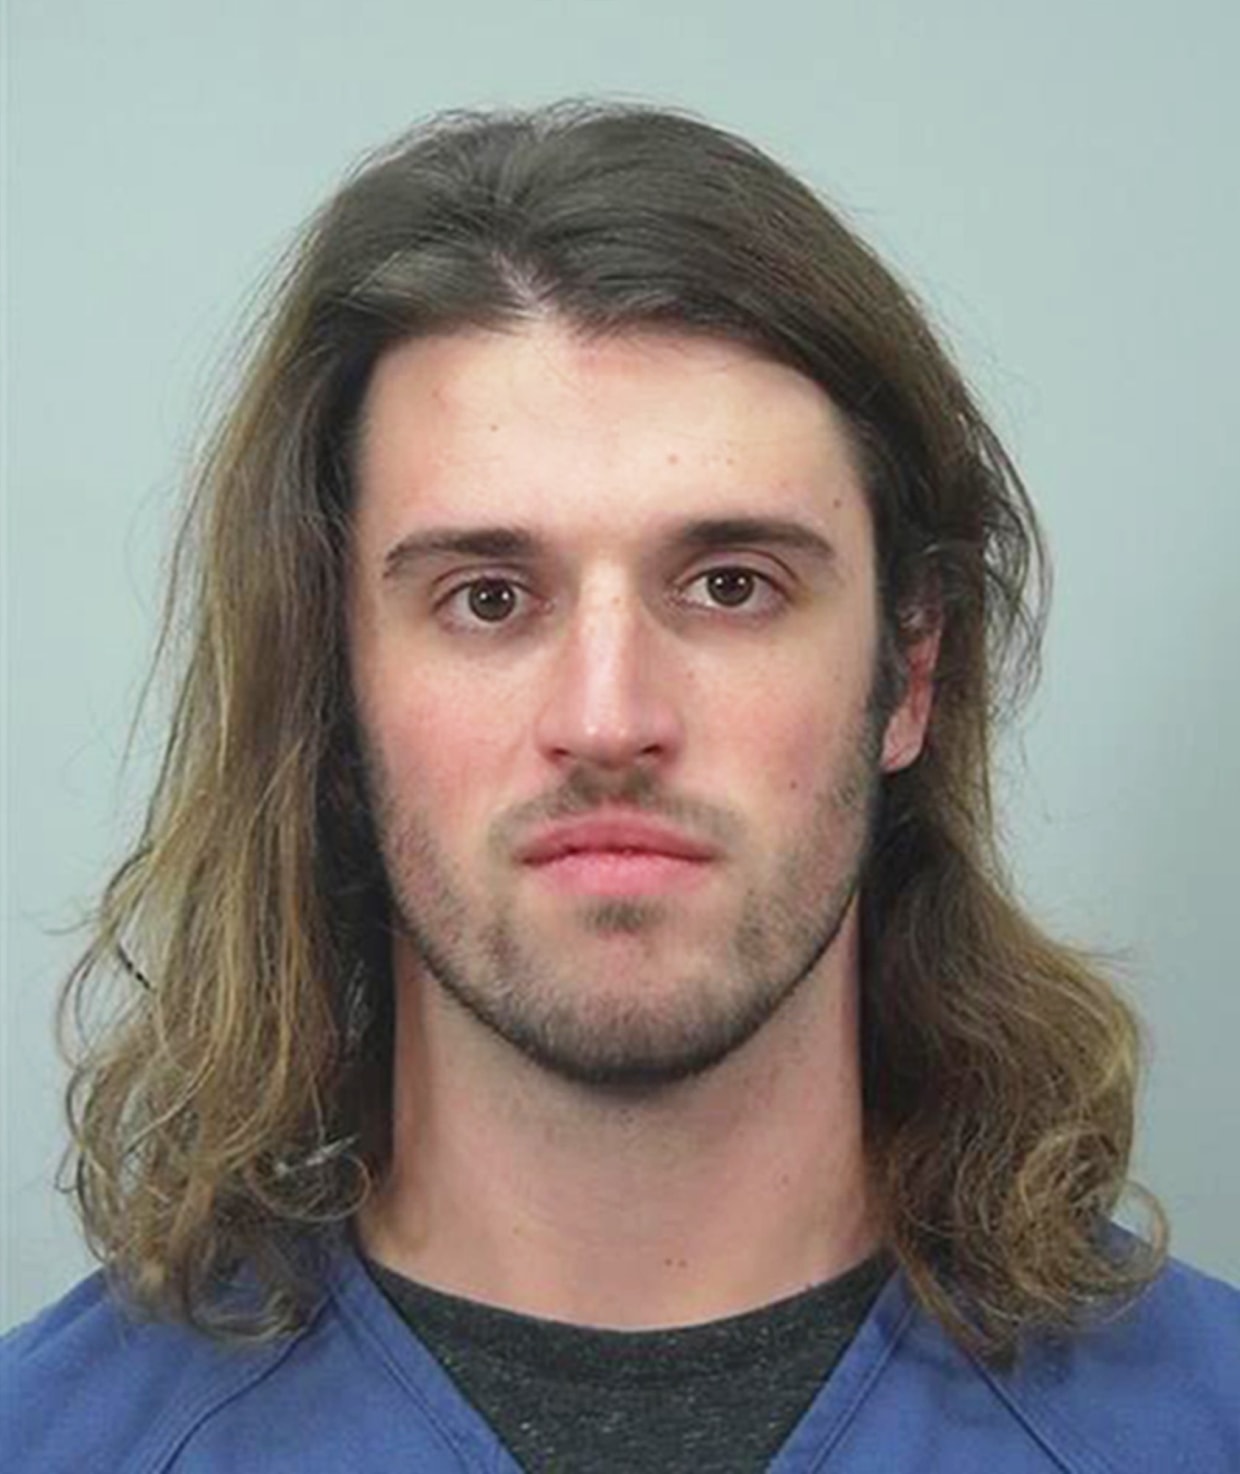 UW-Madison Student Accused of Rape Listed Influences as God, Jimmy Page and Satan